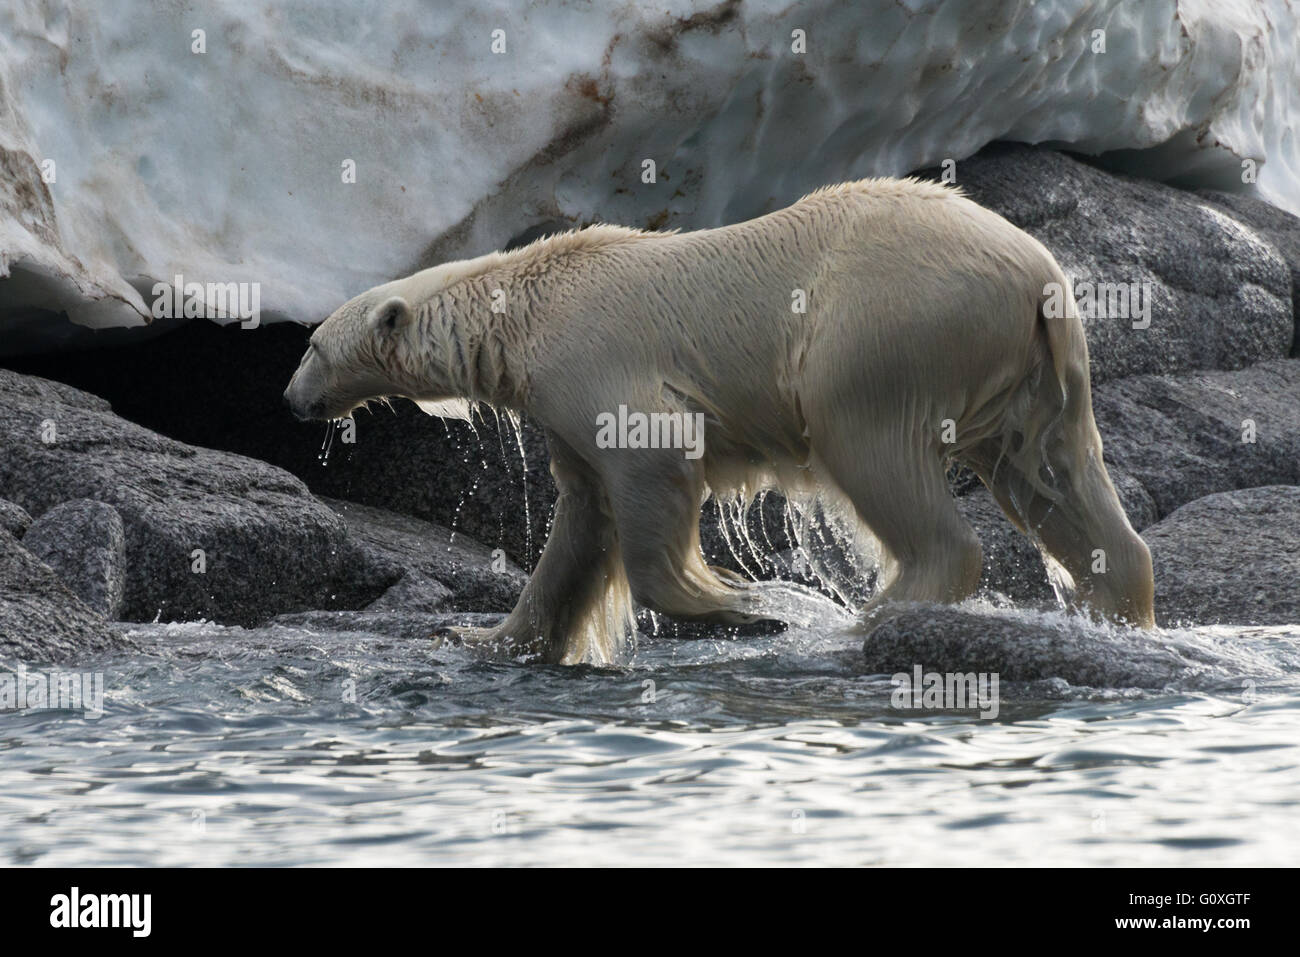 One polar bear dripping wet as it climbs out of the water at Chermsideoya on Nordaustlandet, Svalbard Stock Photo